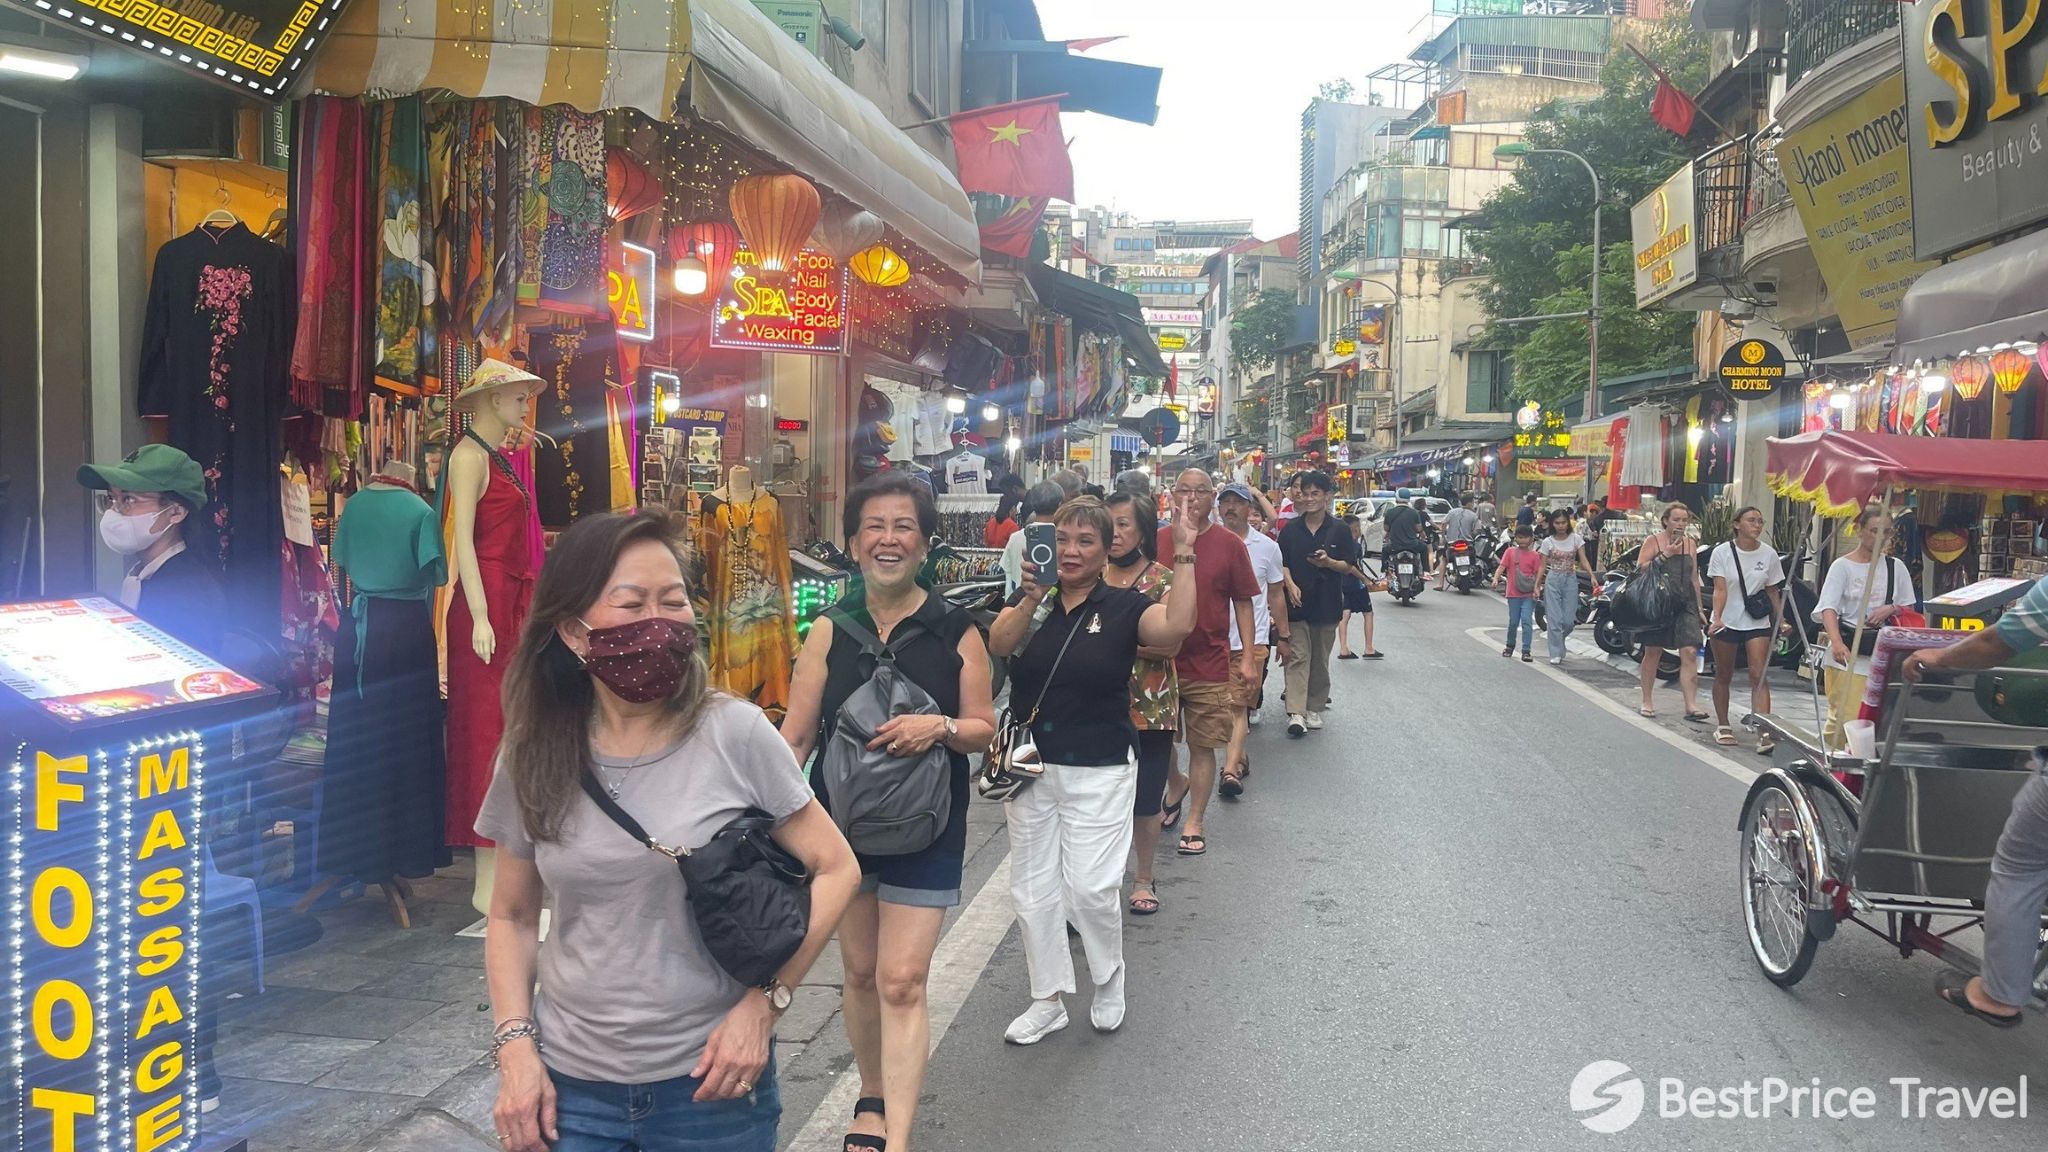 Day 1 Explore Vietnamese Cuisine By Joining A Street Food Walking Tour